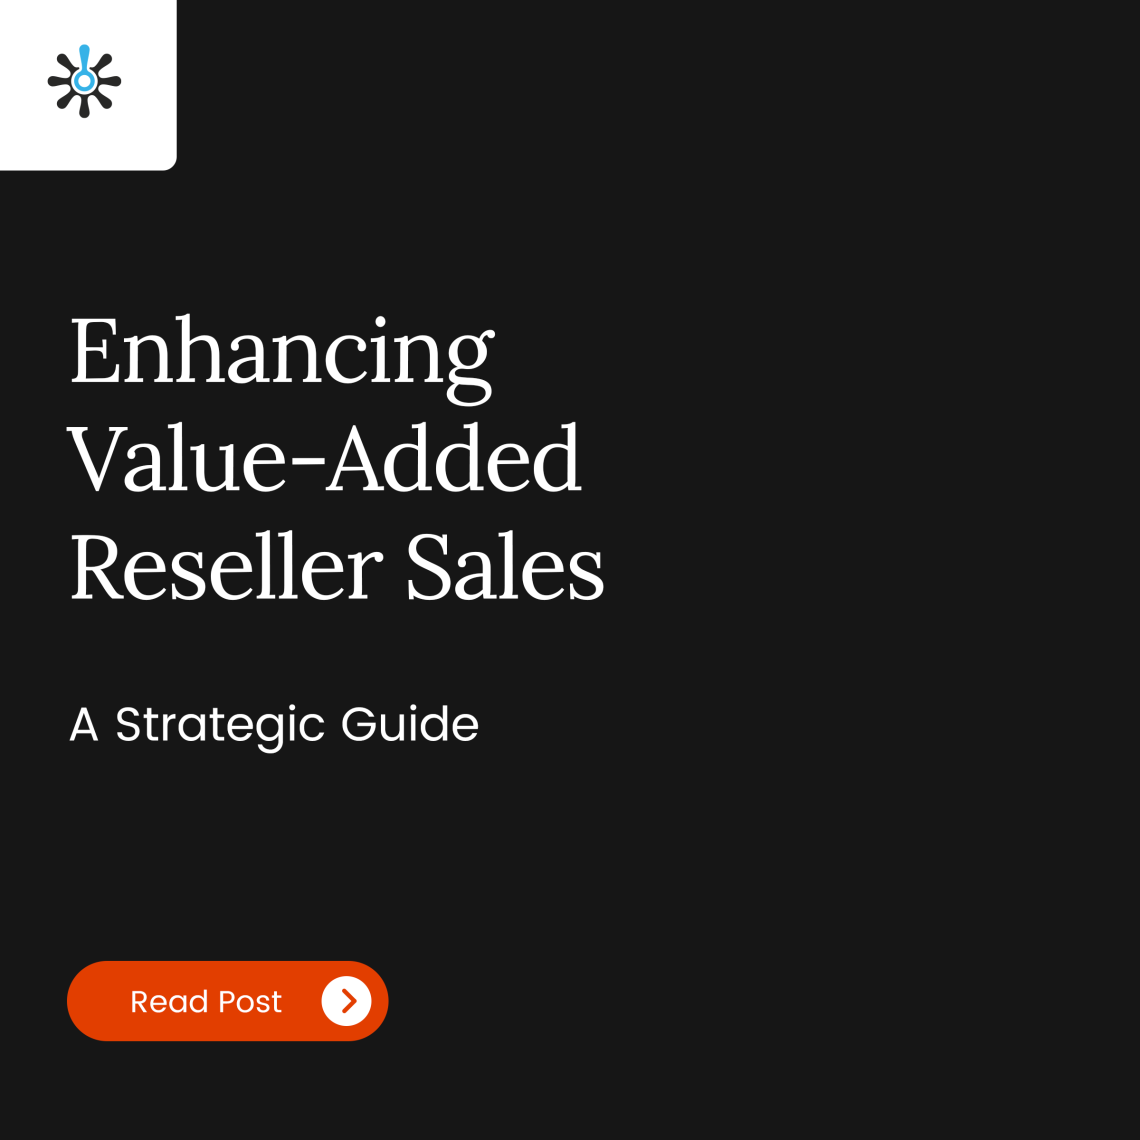 Title Page Reading "Enhancing Value-Added Reseller Sales"